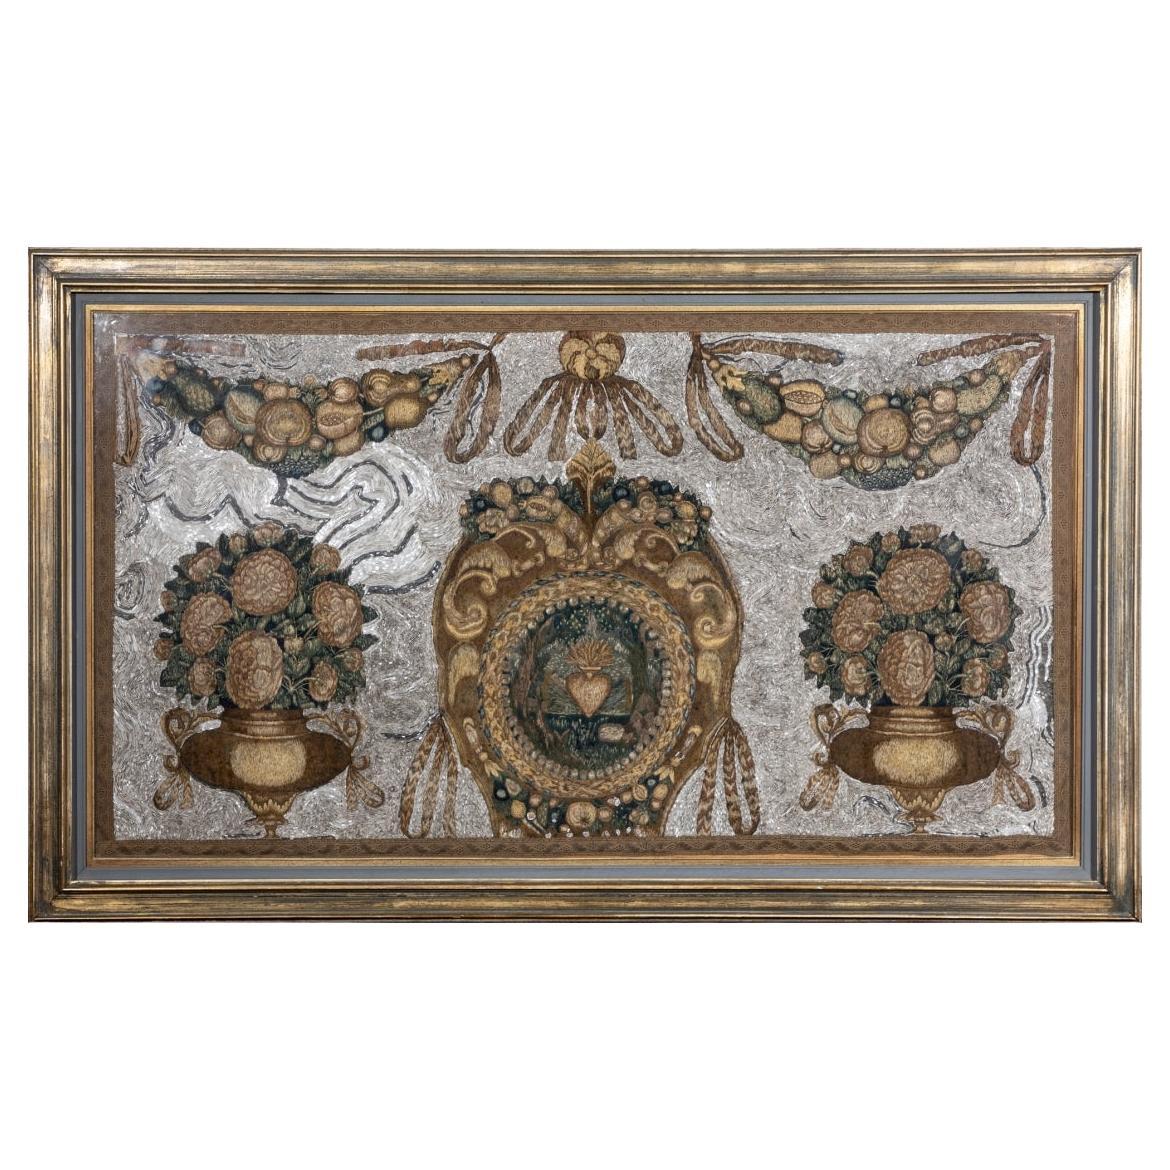 Framed Large Scale Antique Embroidered Panel